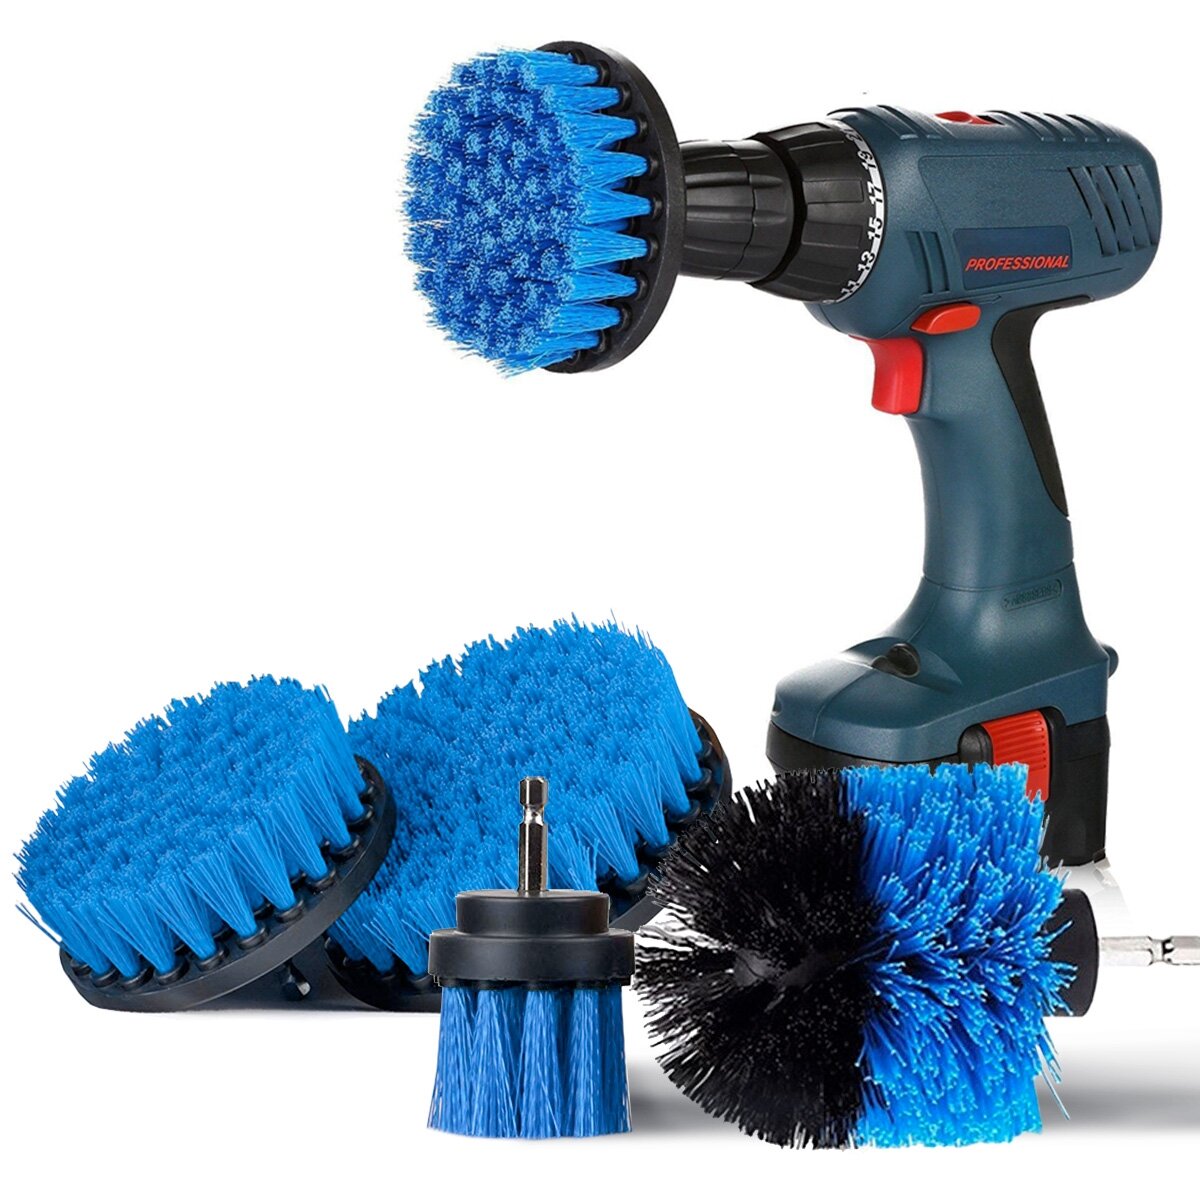 SAFETYON 4 Pieces Drill Brush Attachment Electric Drill Brushes for Cleaning Pool Tile Flooring Bric